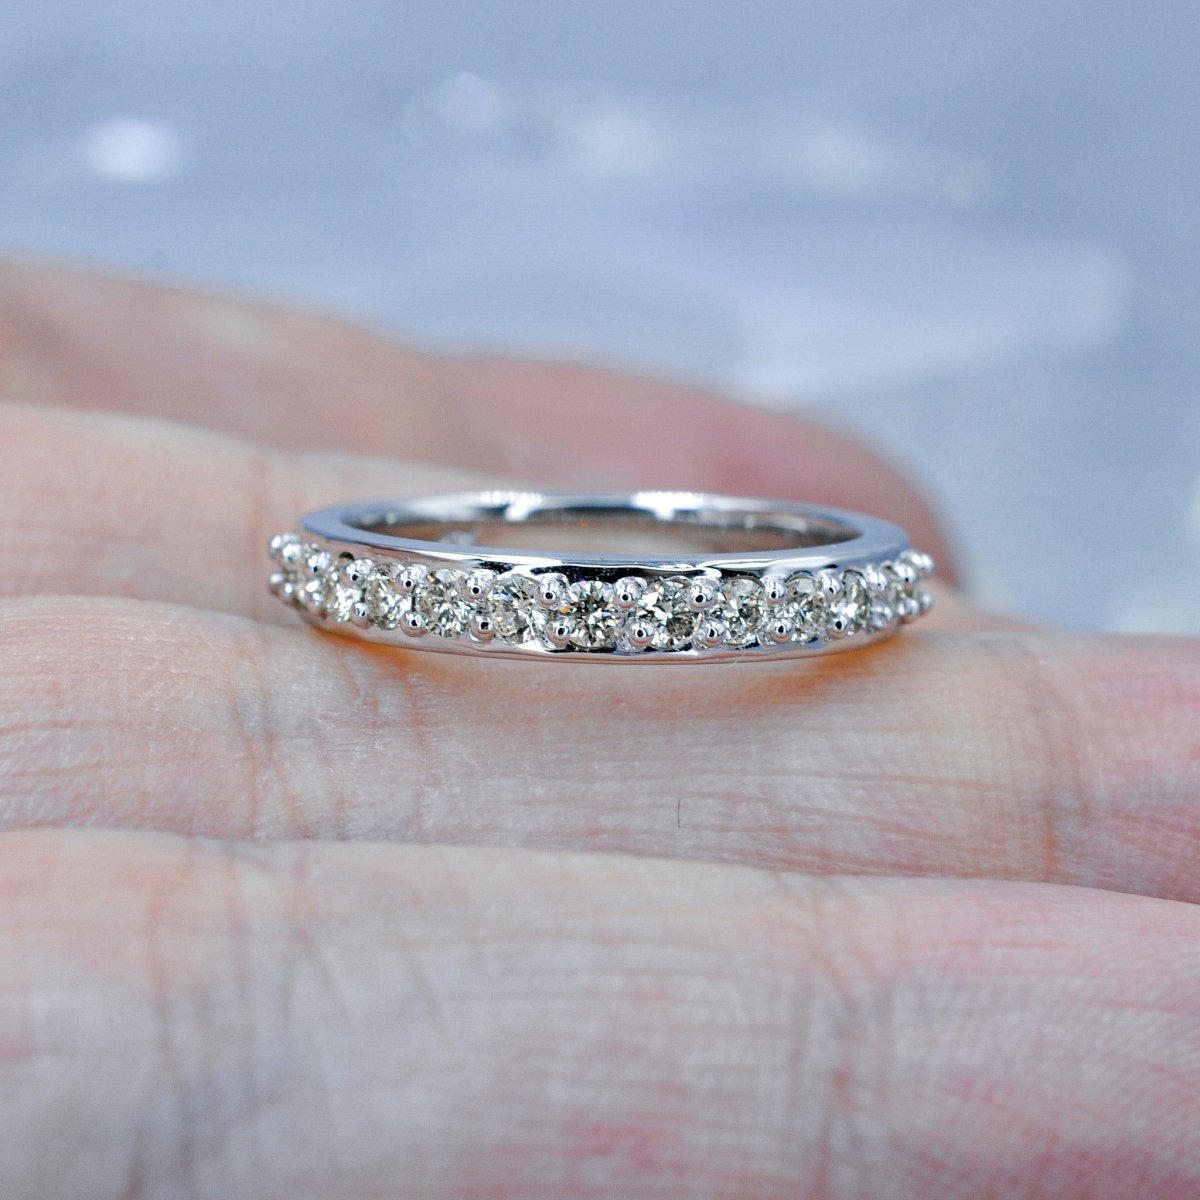 Quality 0.50 CT Diamond Wedding Band in 14 KT White Gold - Primestyle.com